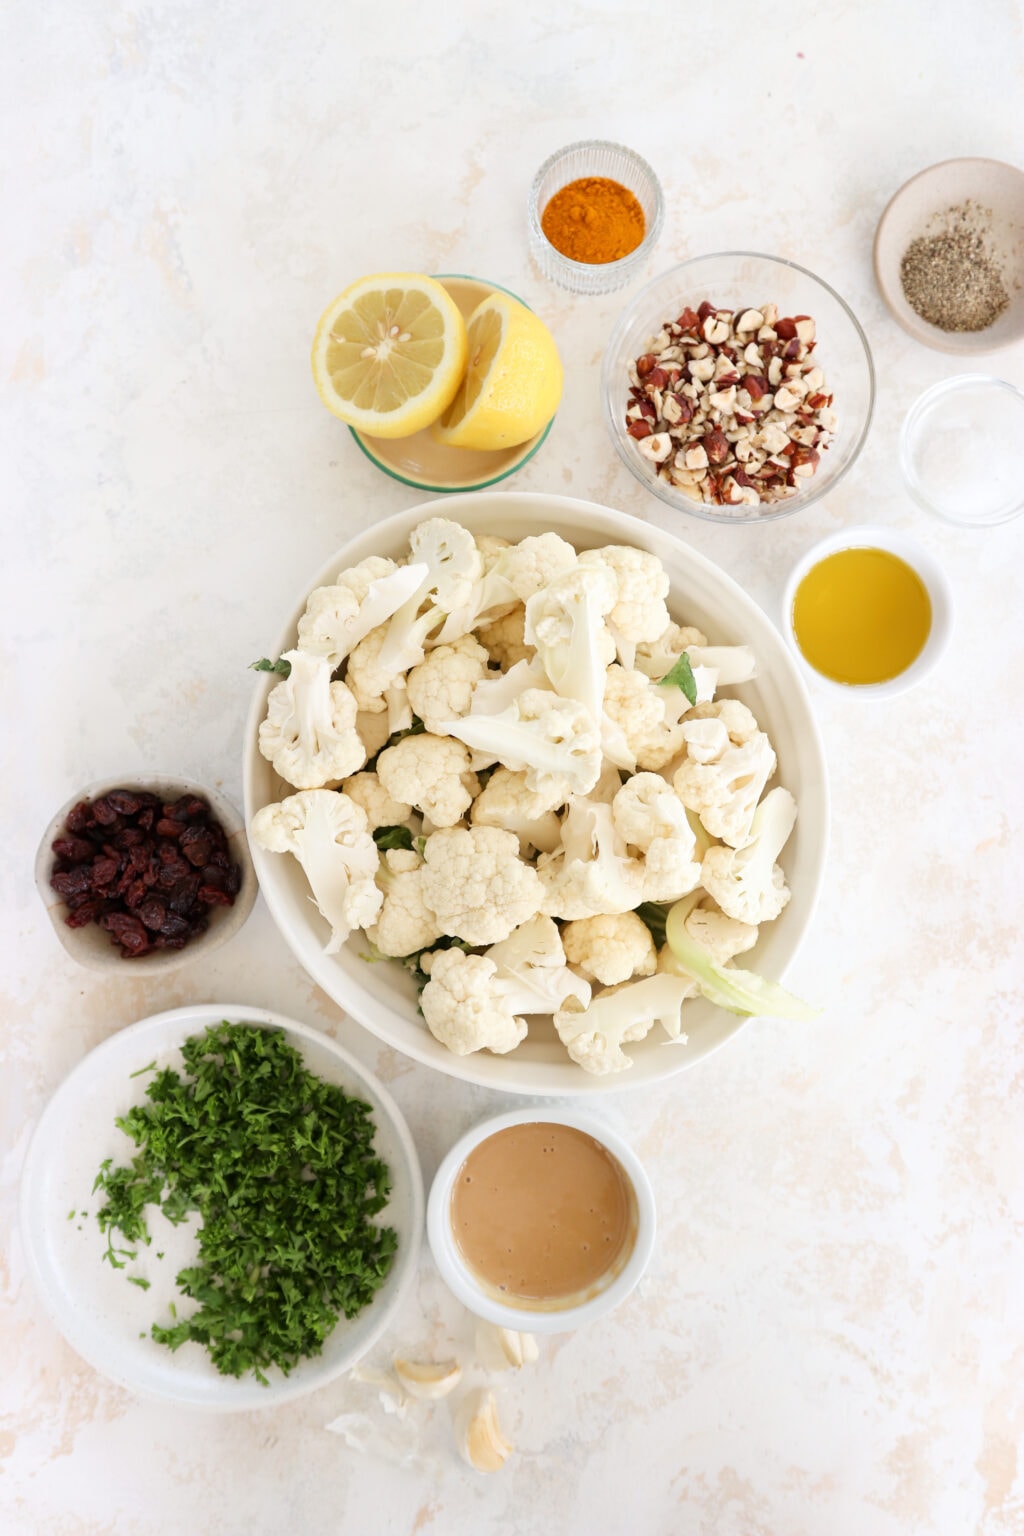 Ingredients for Curry Roasted Cauliflower with Lemon Tahini Sauce in white bowls. Ingredients include cauliflower florets, avocado oil, salt and pepper, curry powder, raisins, hazelnuts, parsley, tahini, lemon juice, olive oil, and garlic cloves